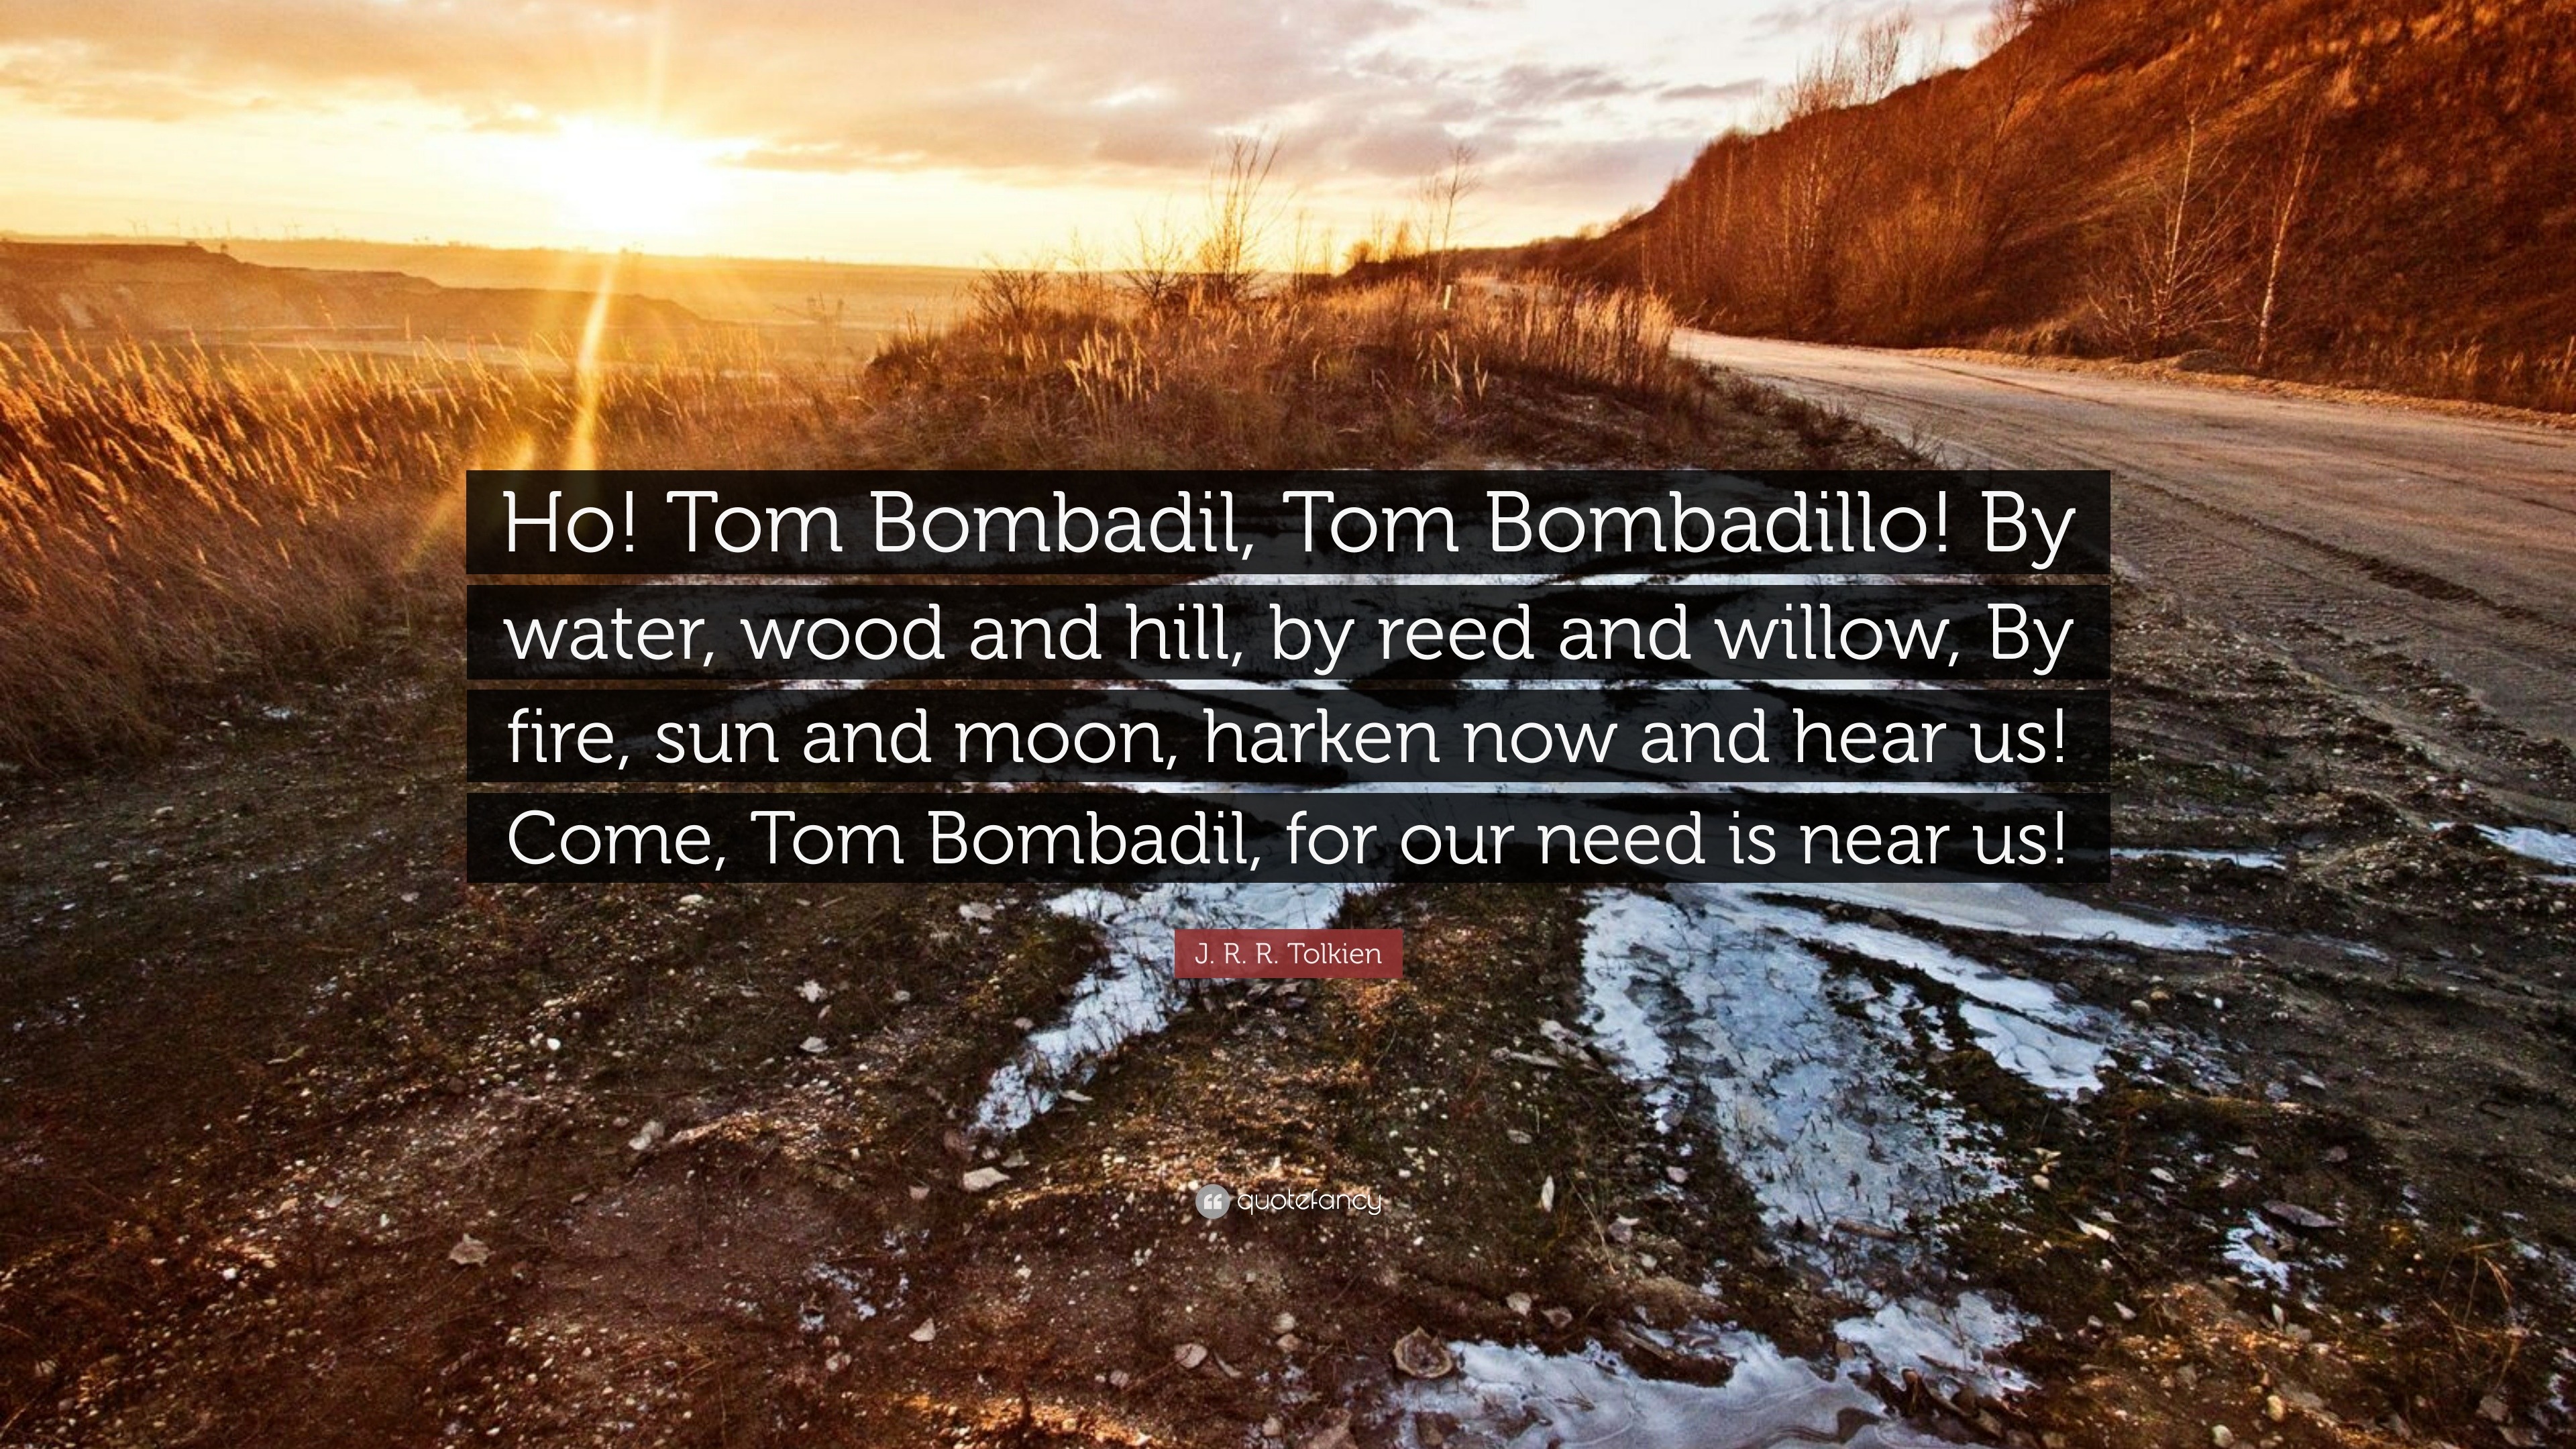 J R R Tolkien Quote Ho Tom Bombadil Tom Bombadillo By Water Wood And Hill By Reed And Willow By Fire Sun And Moon Harken Now And Hea 7 Wallpapers Quotefancy By water, wood and hill, by the reed and the willow, by fire, sun and moon, harken now and hear come, tom bombadil, for our need is near us! j r r tolkien quote ho tom